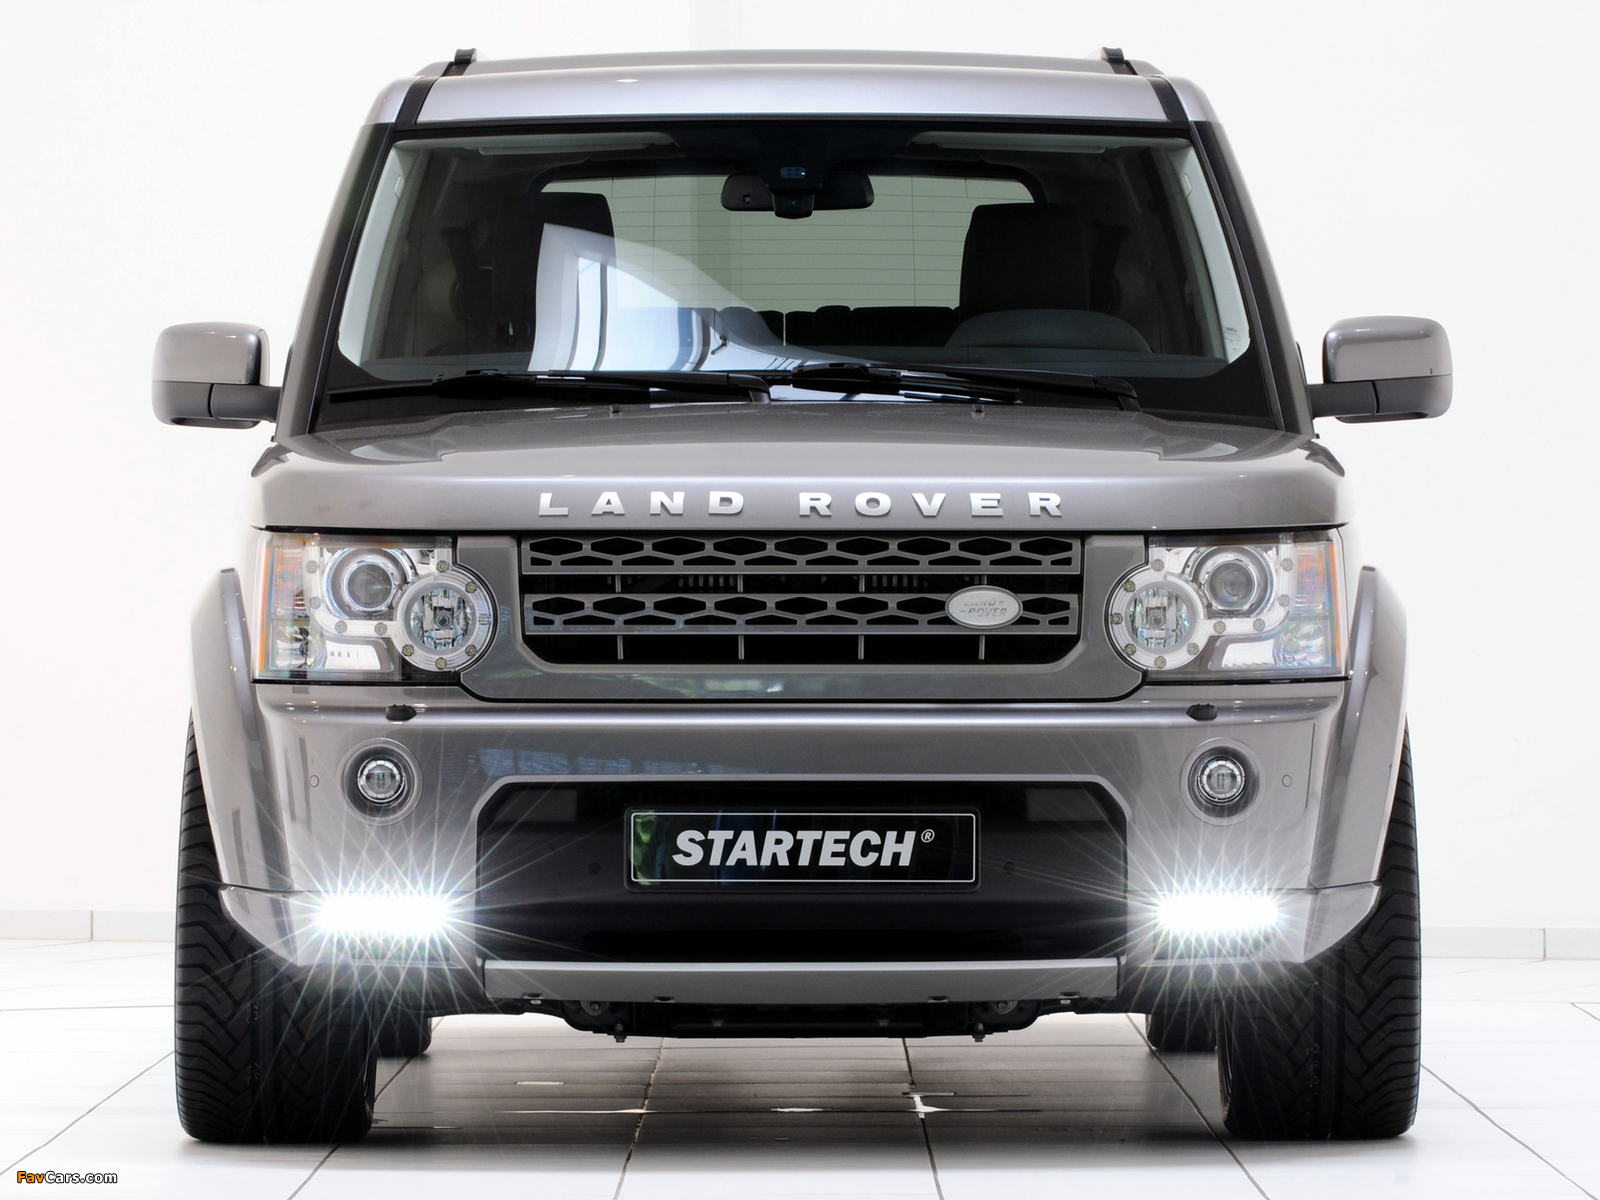 Startech Land Rover Discovery 4 2011 pictures (1600 x 1200)